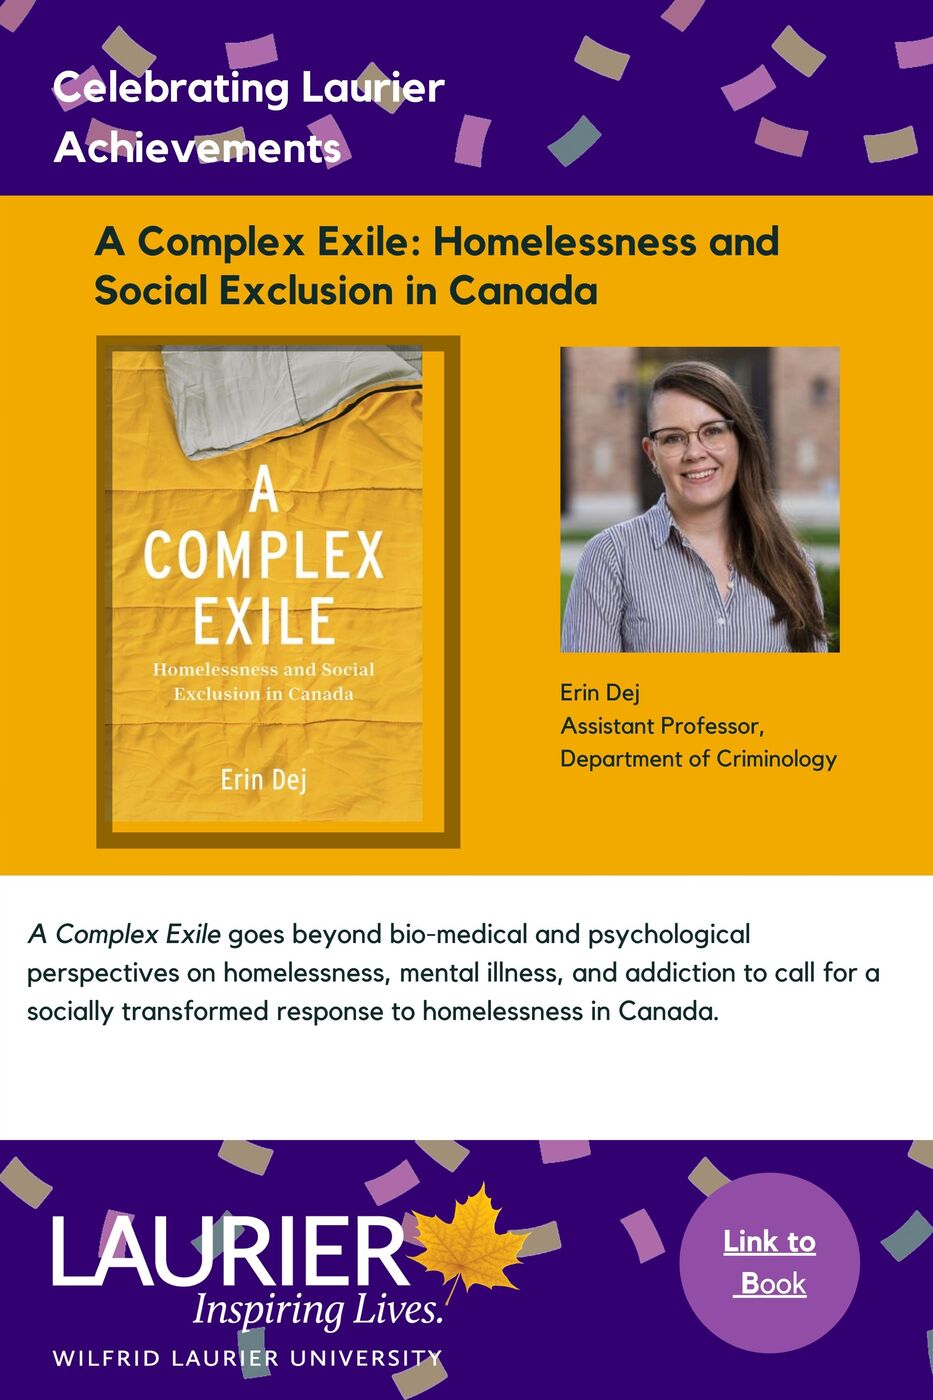 A Complex Exile: Homelessness and Social Exclusion in Canada promotional poster for the Celebrating Laurier Achievements Program with a headshot of the book's author, Erin Dej.